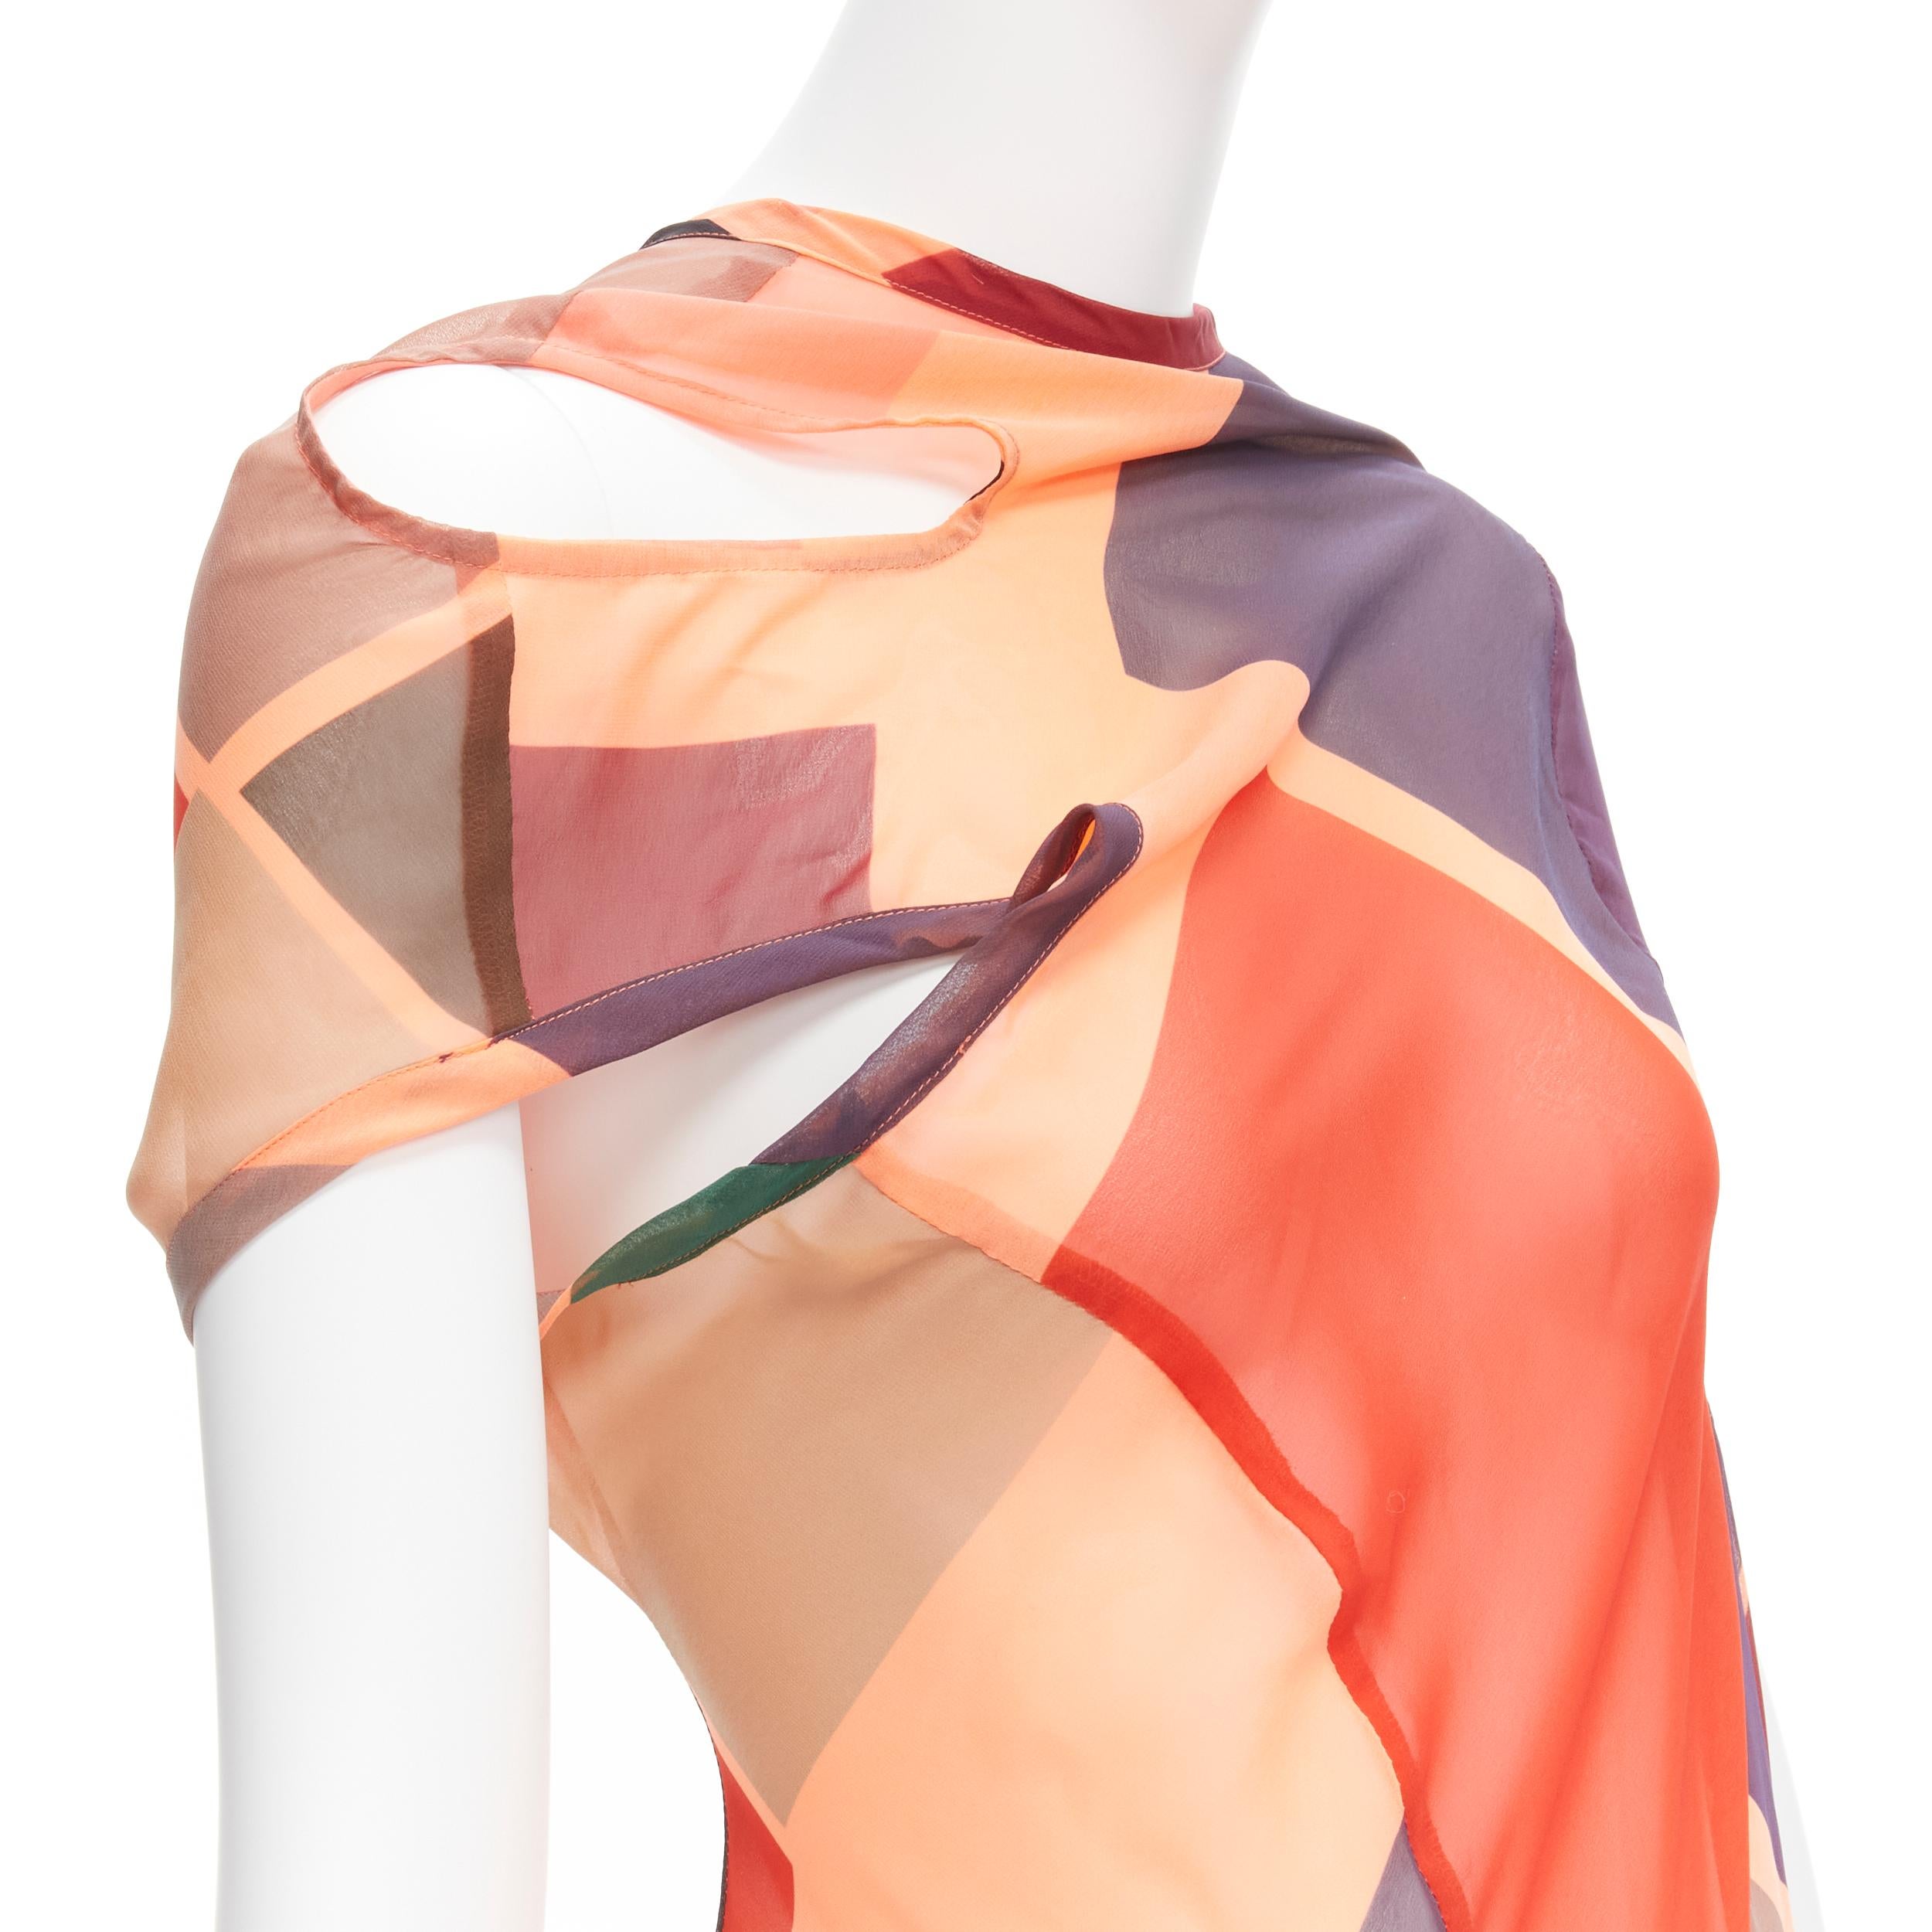 rare COMME DES GARCONS 1996 Vintage Runway colorblock abstract asymmetric sheer dress M
Reference: TGAS/C02009
Brand: Comme Des Garcons
Designer: Rei Kawakubo
Collection: Spring 1996 - Runway
Material: Polyester
Color: Multicolour
Pattern: